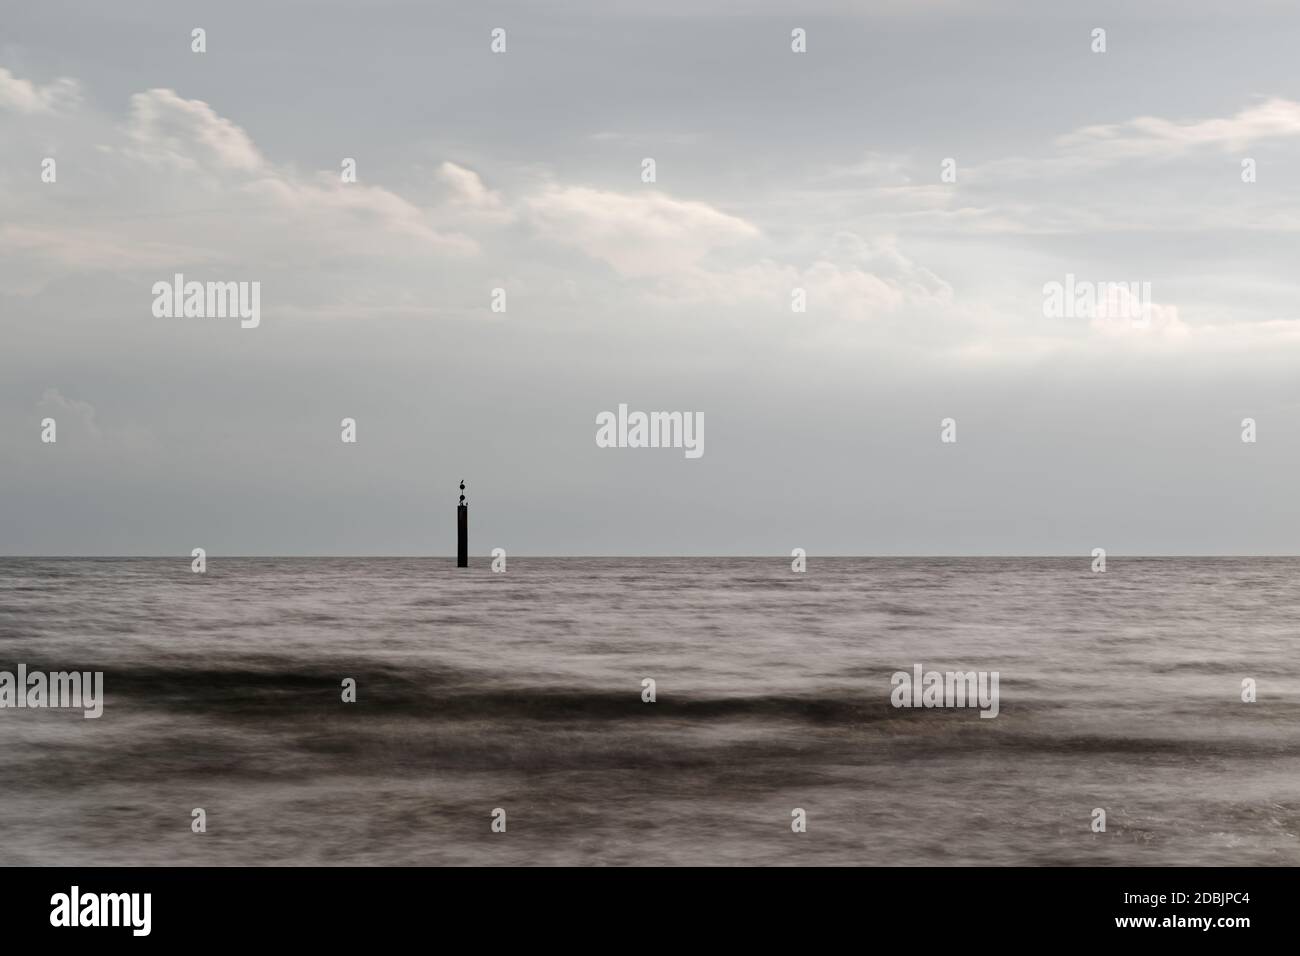 Quiet beach shot of the Baltic Sea coast with a prominent wave structure and a signal mast in the background, the water surface is smoothed by long ti Stock Photo